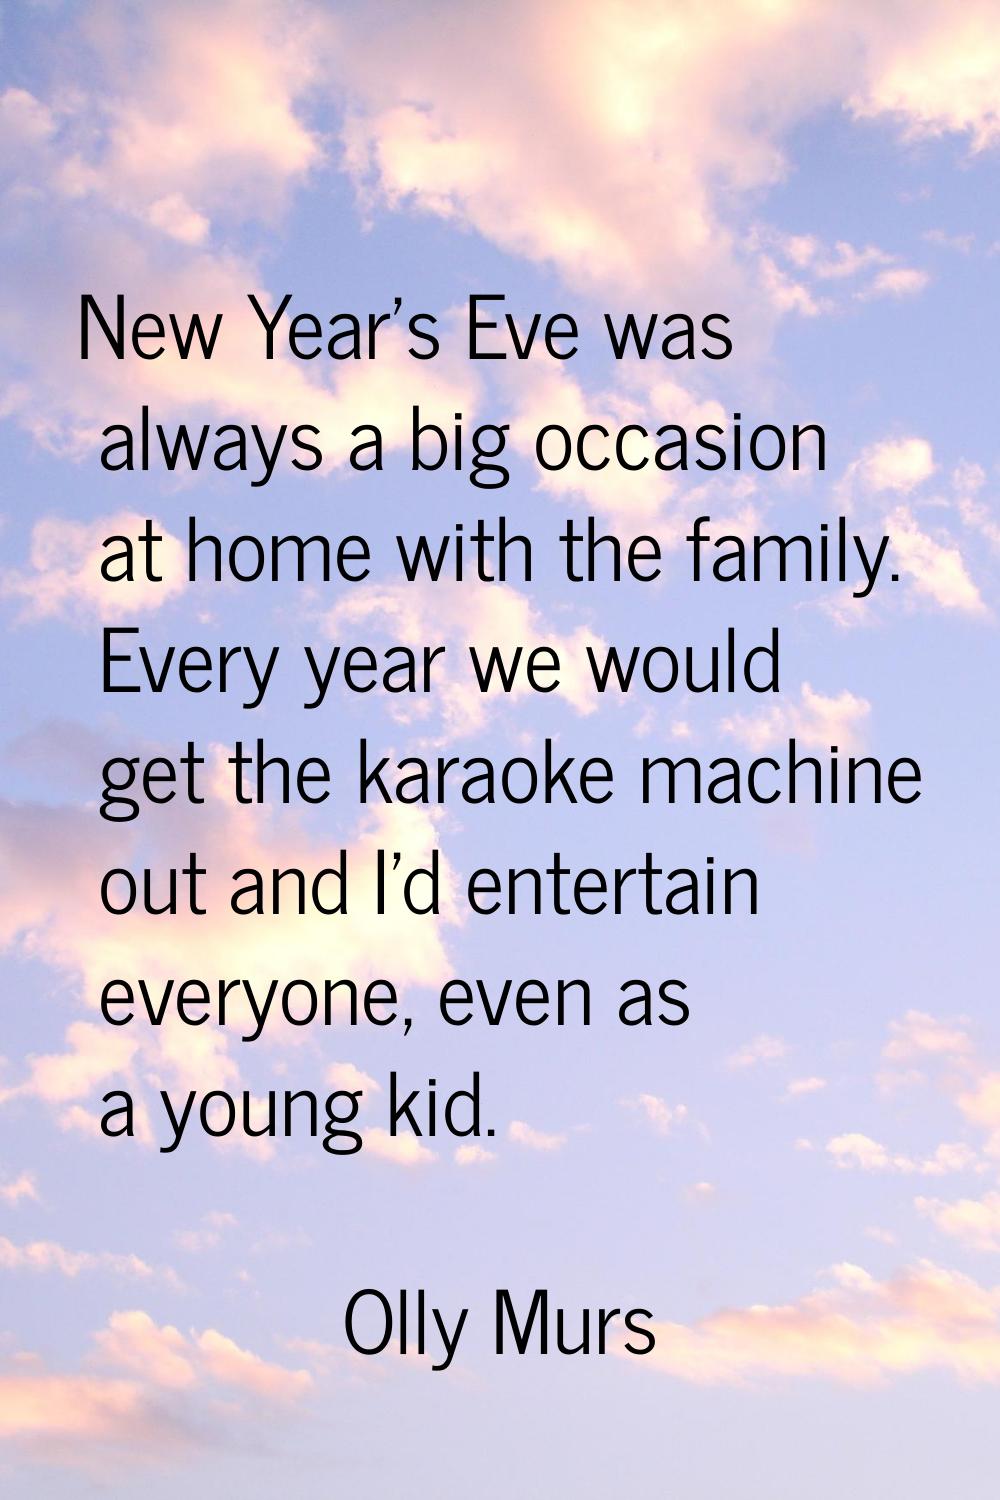 New Year's Eve was always a big occasion at home with the family. Every year we would get the karao